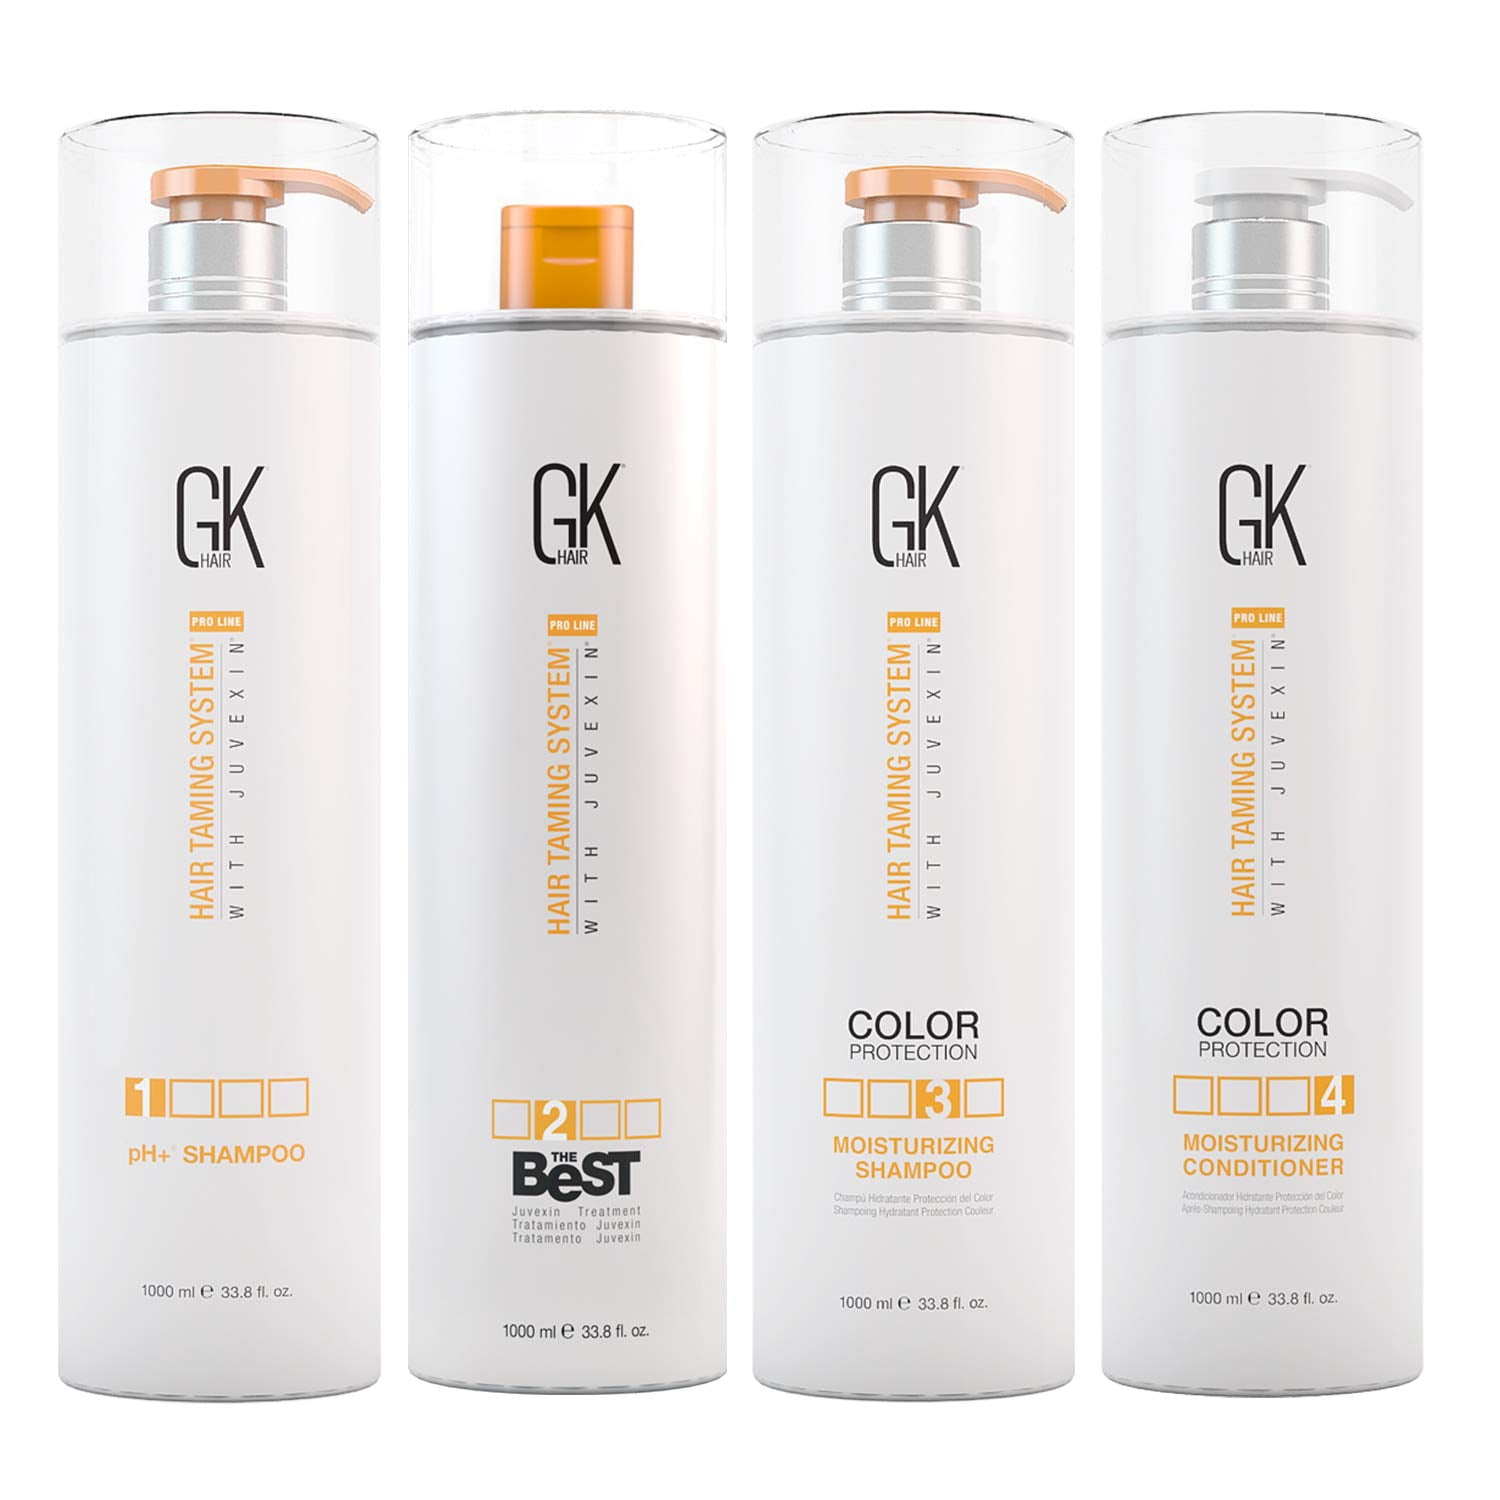 GK HAIR Global Keratin The Best Kit ( Fl Oz/1000ml) Smoothing Keratin  Hair Treatment Professional Brazilian Complex Blowout Straightening For  Silky Smooth & Frizz Free Hair - Formaldehyde Free 